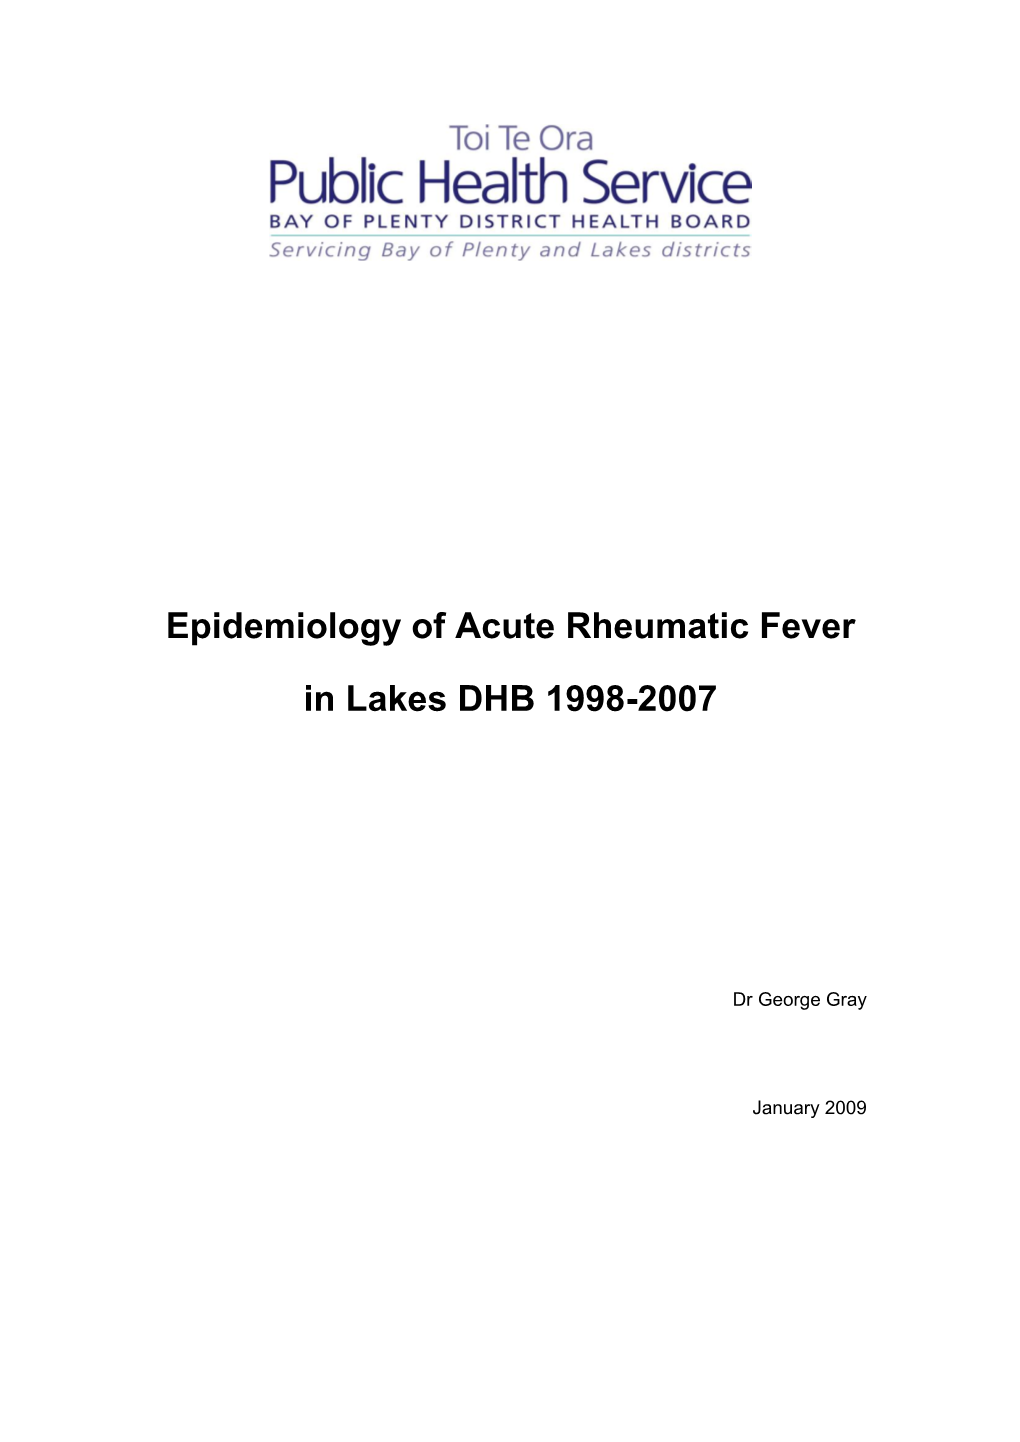 Epidemiology of Acute Rheumatic Fever in Lakes DHB 1998-2007